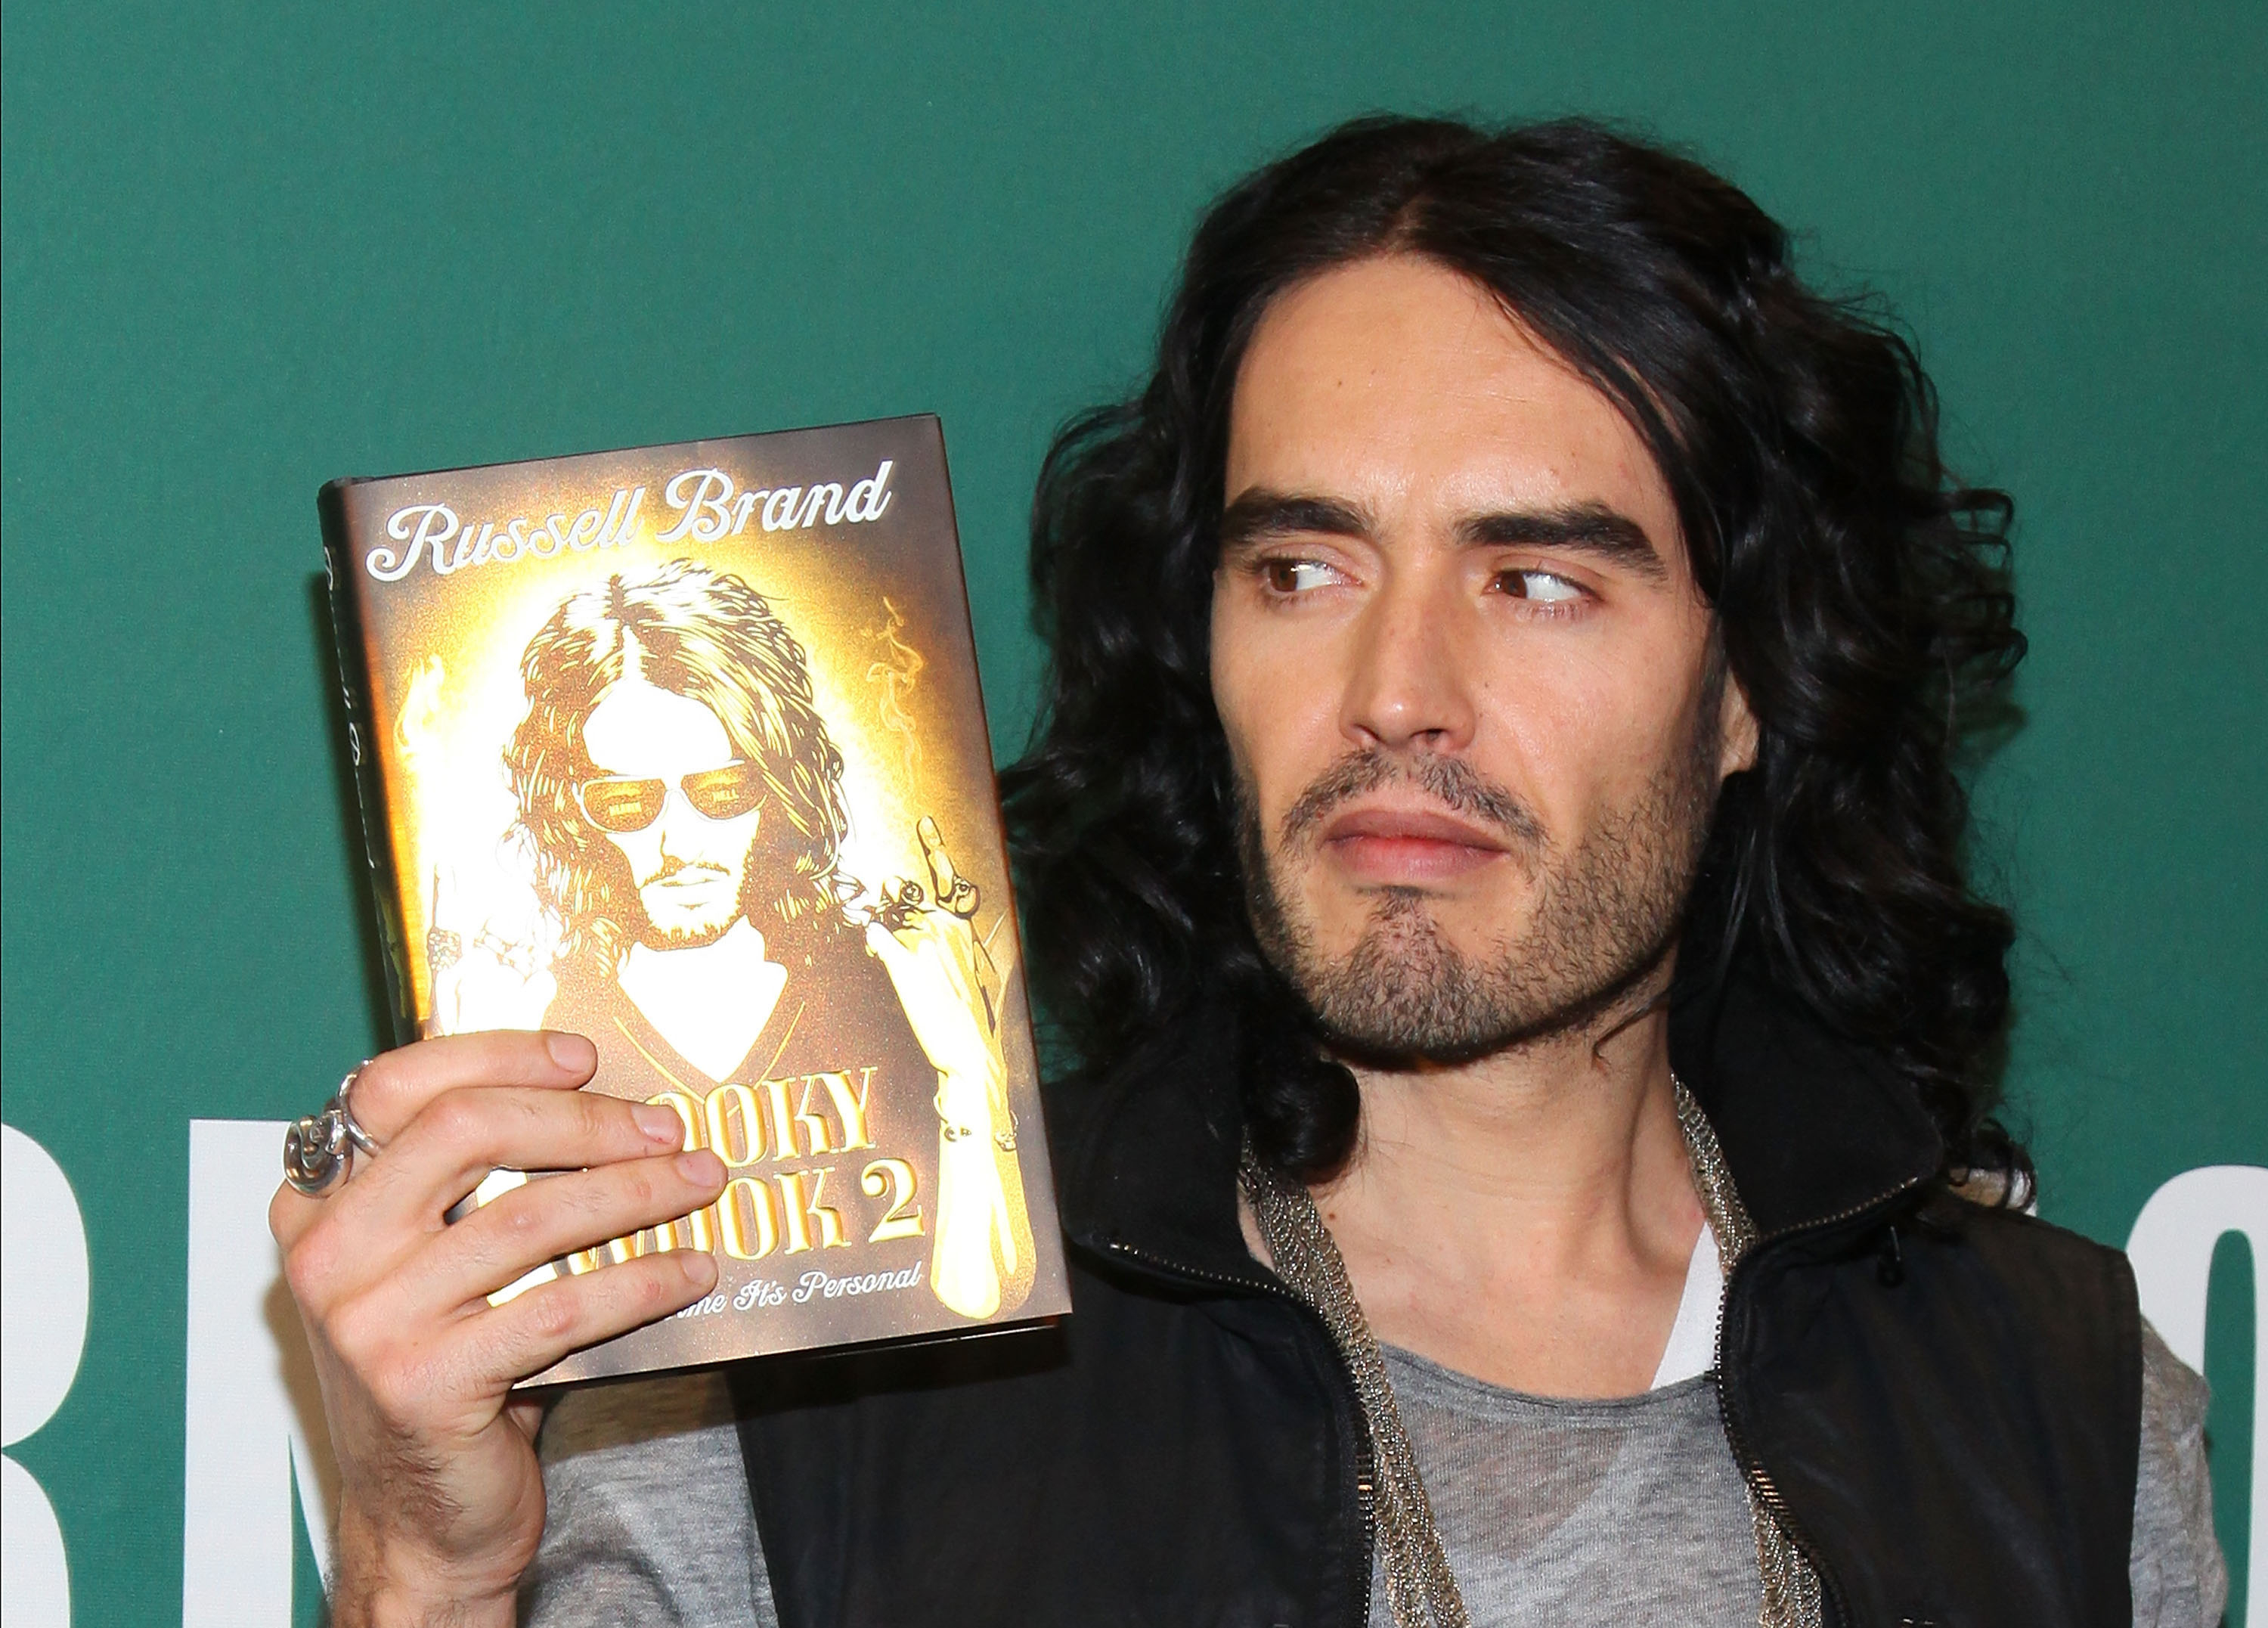 Russell holding up his book